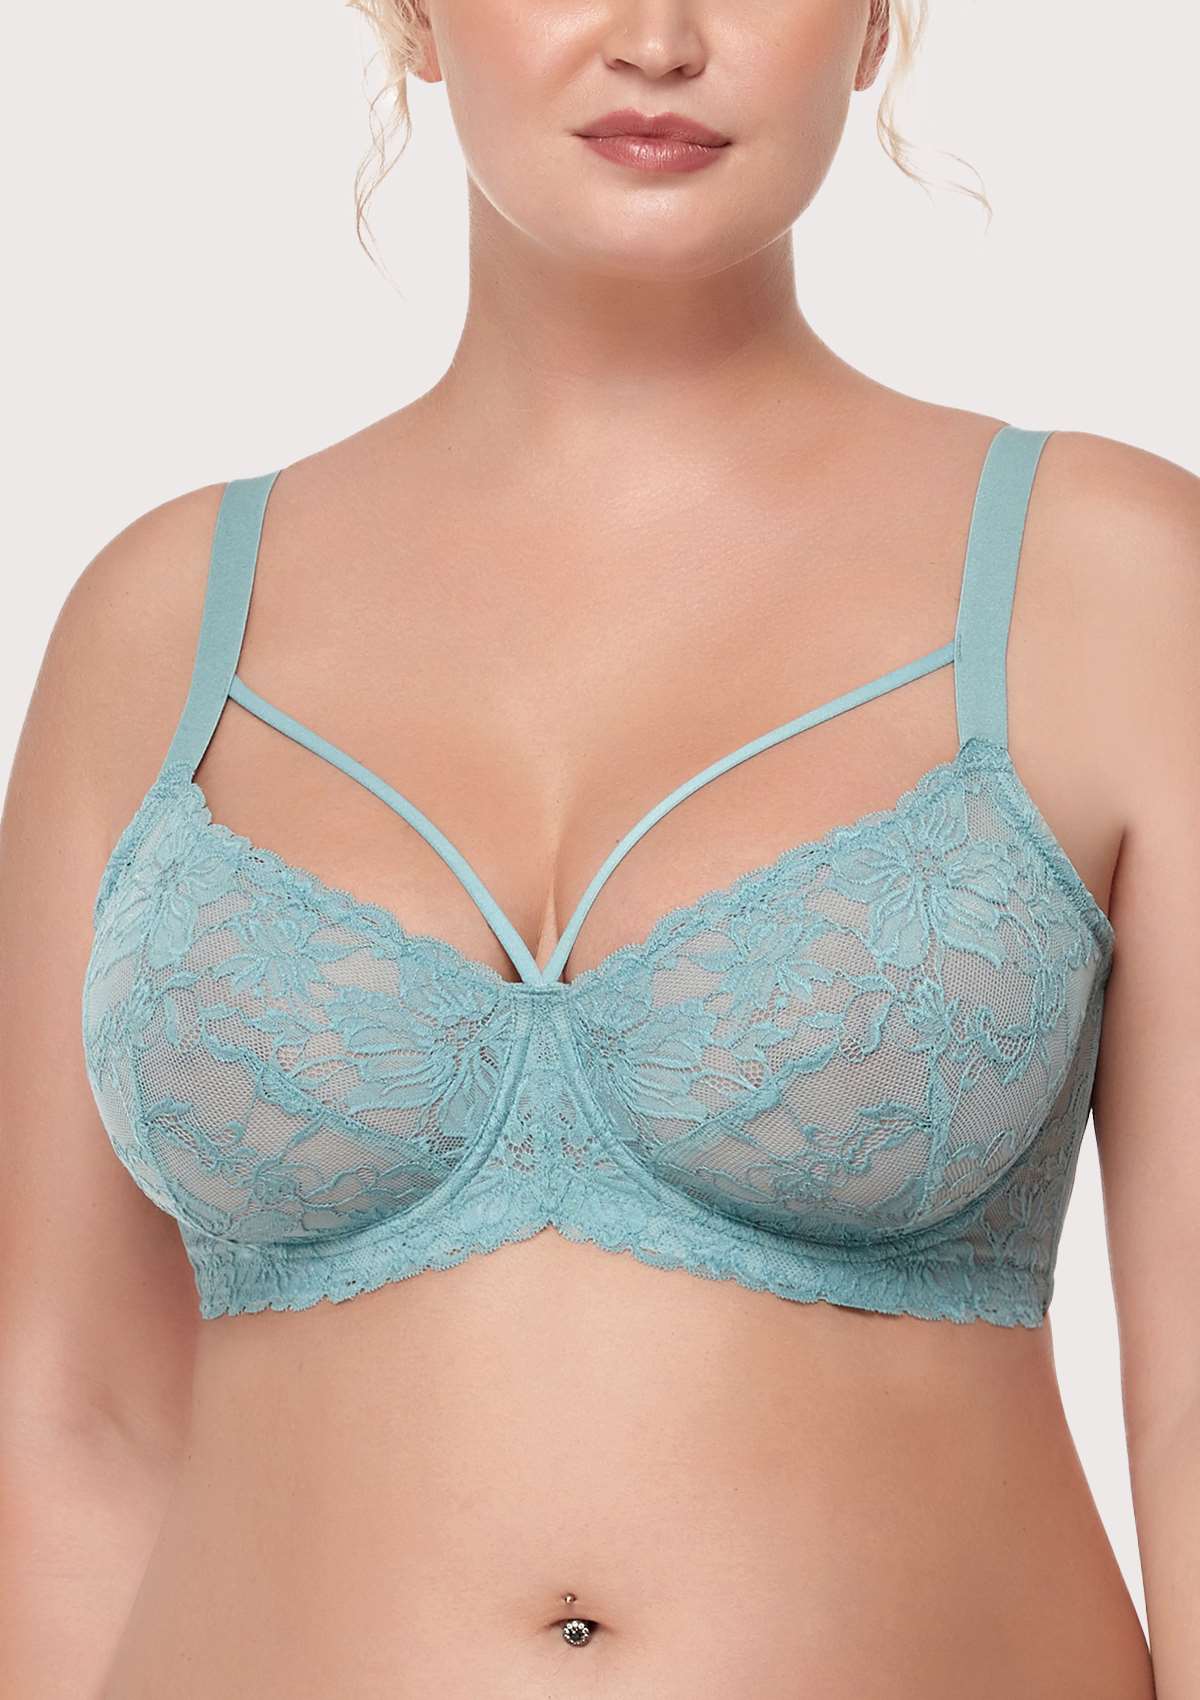 HSIA Pretty In Petals Unlined Lace Bra: Comfortable And Supportive Bra - Crystal Blue / 34 / D